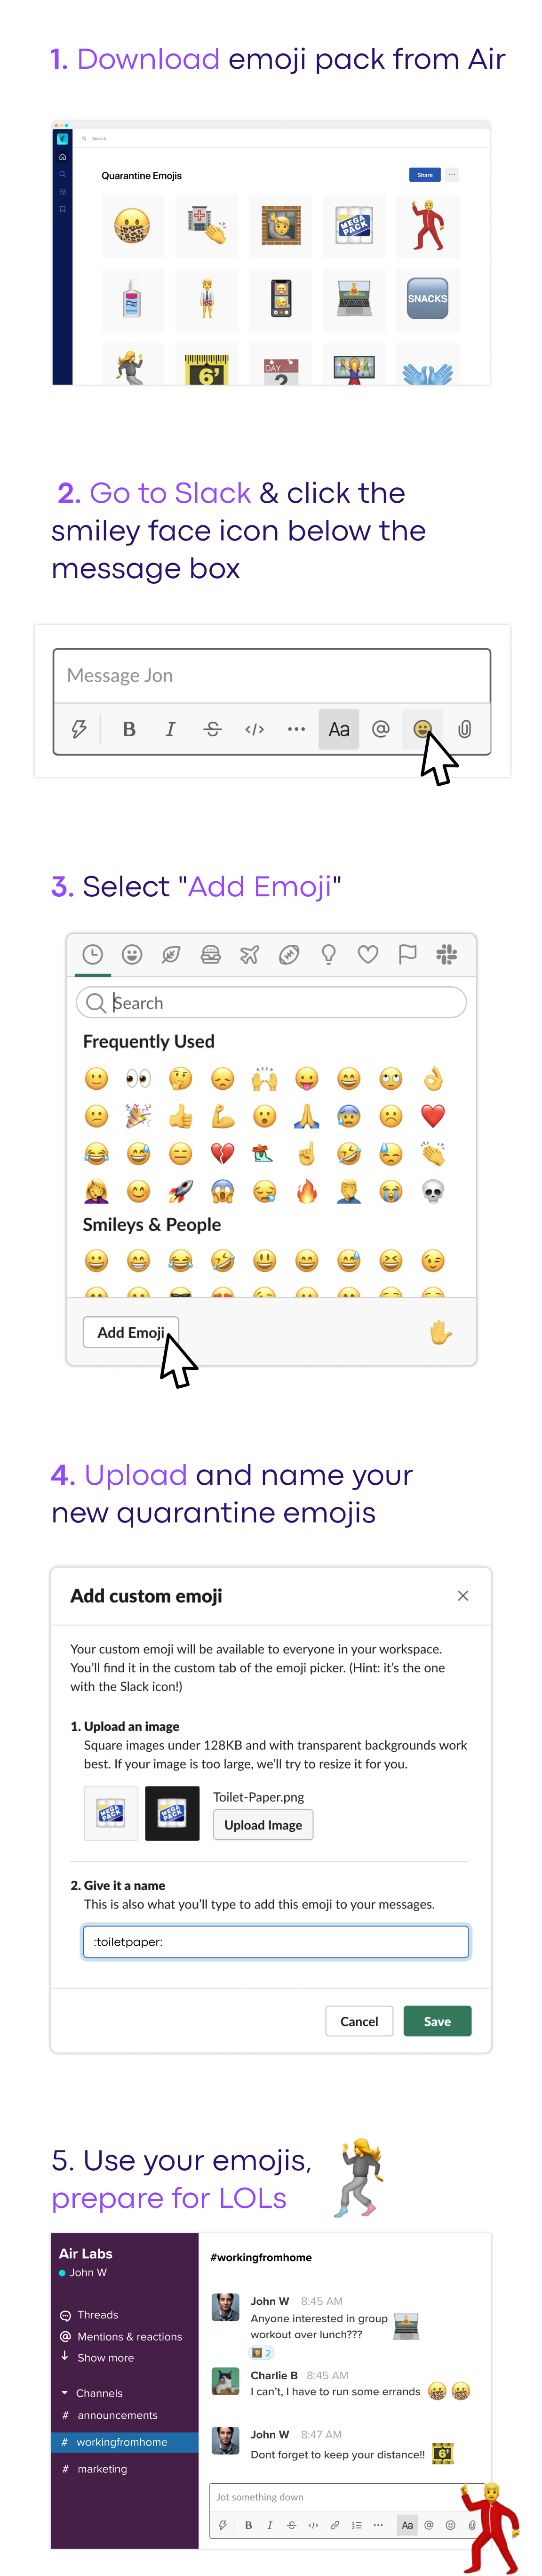 Instructions on how to add emojis to Slack